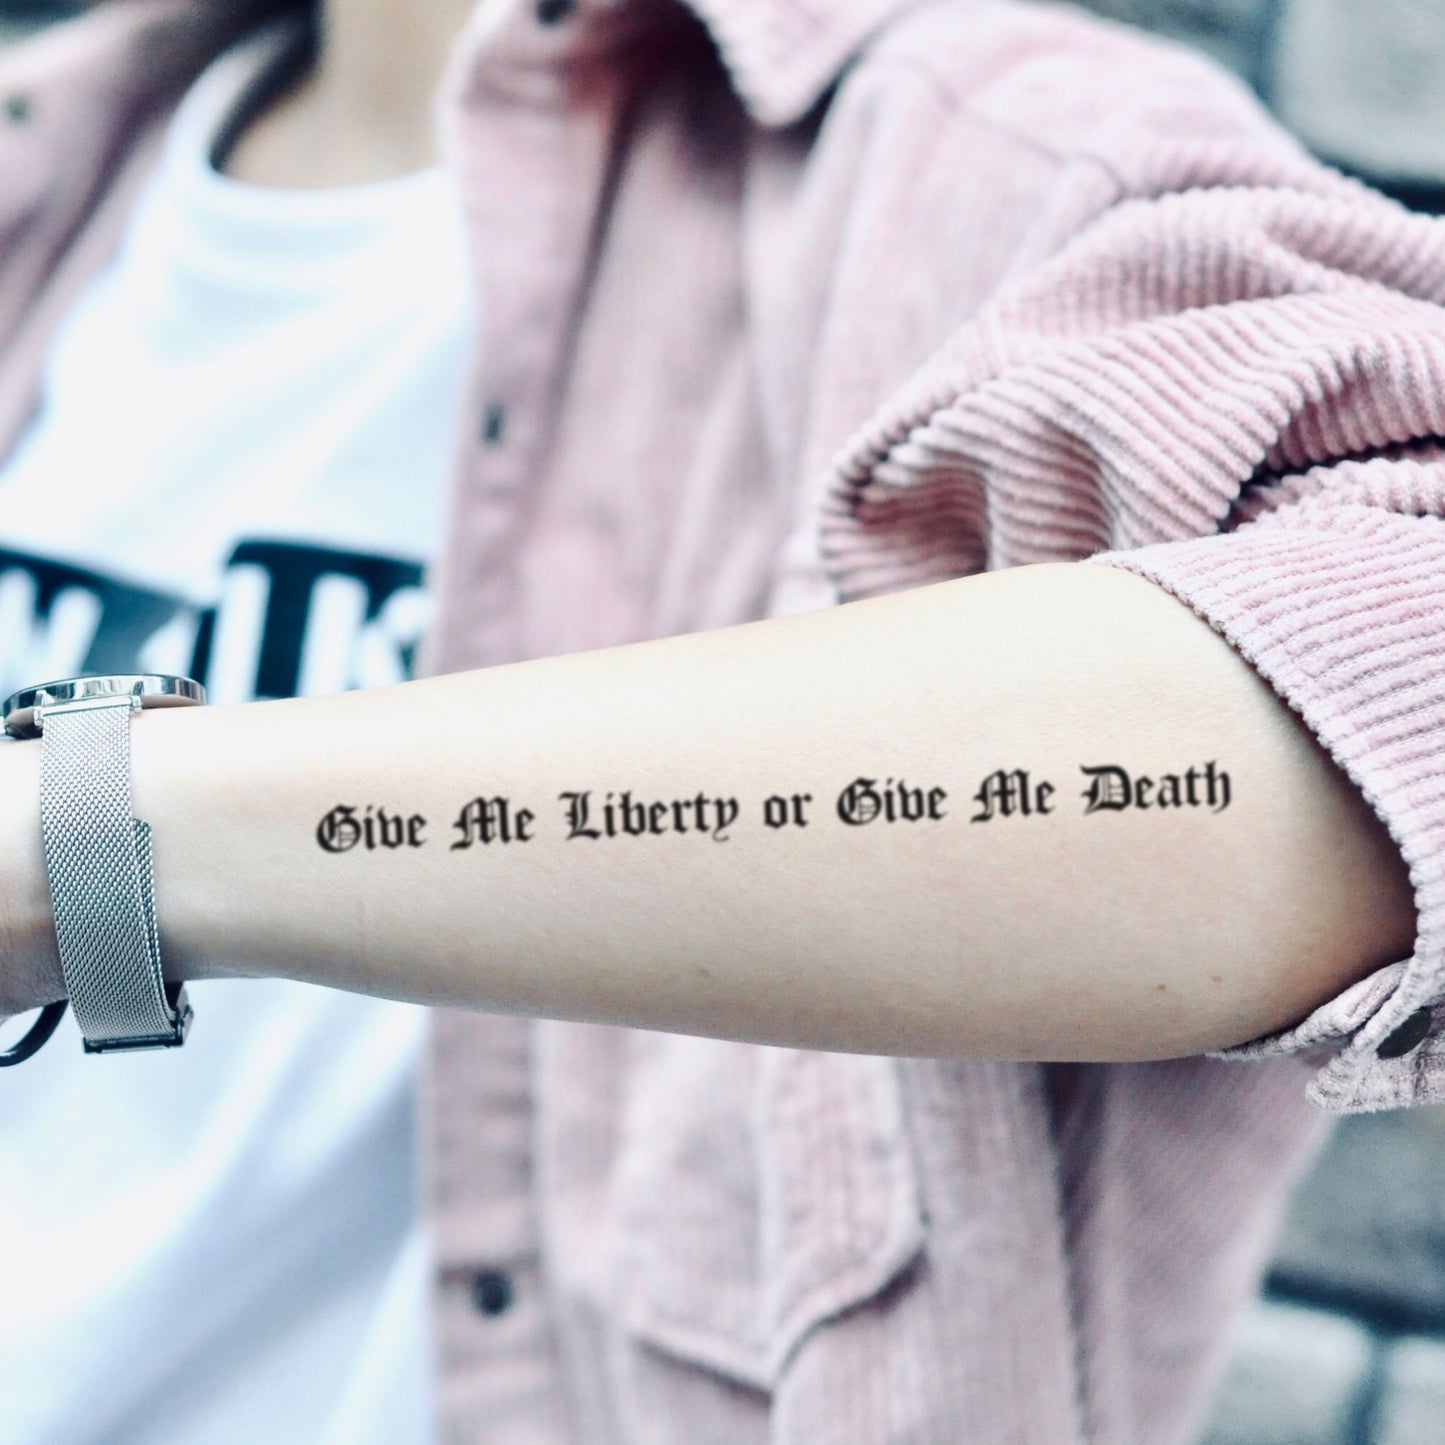 fake medium give me liberty or give me death freedom lettering temporary tattoo sticker design idea on forearm